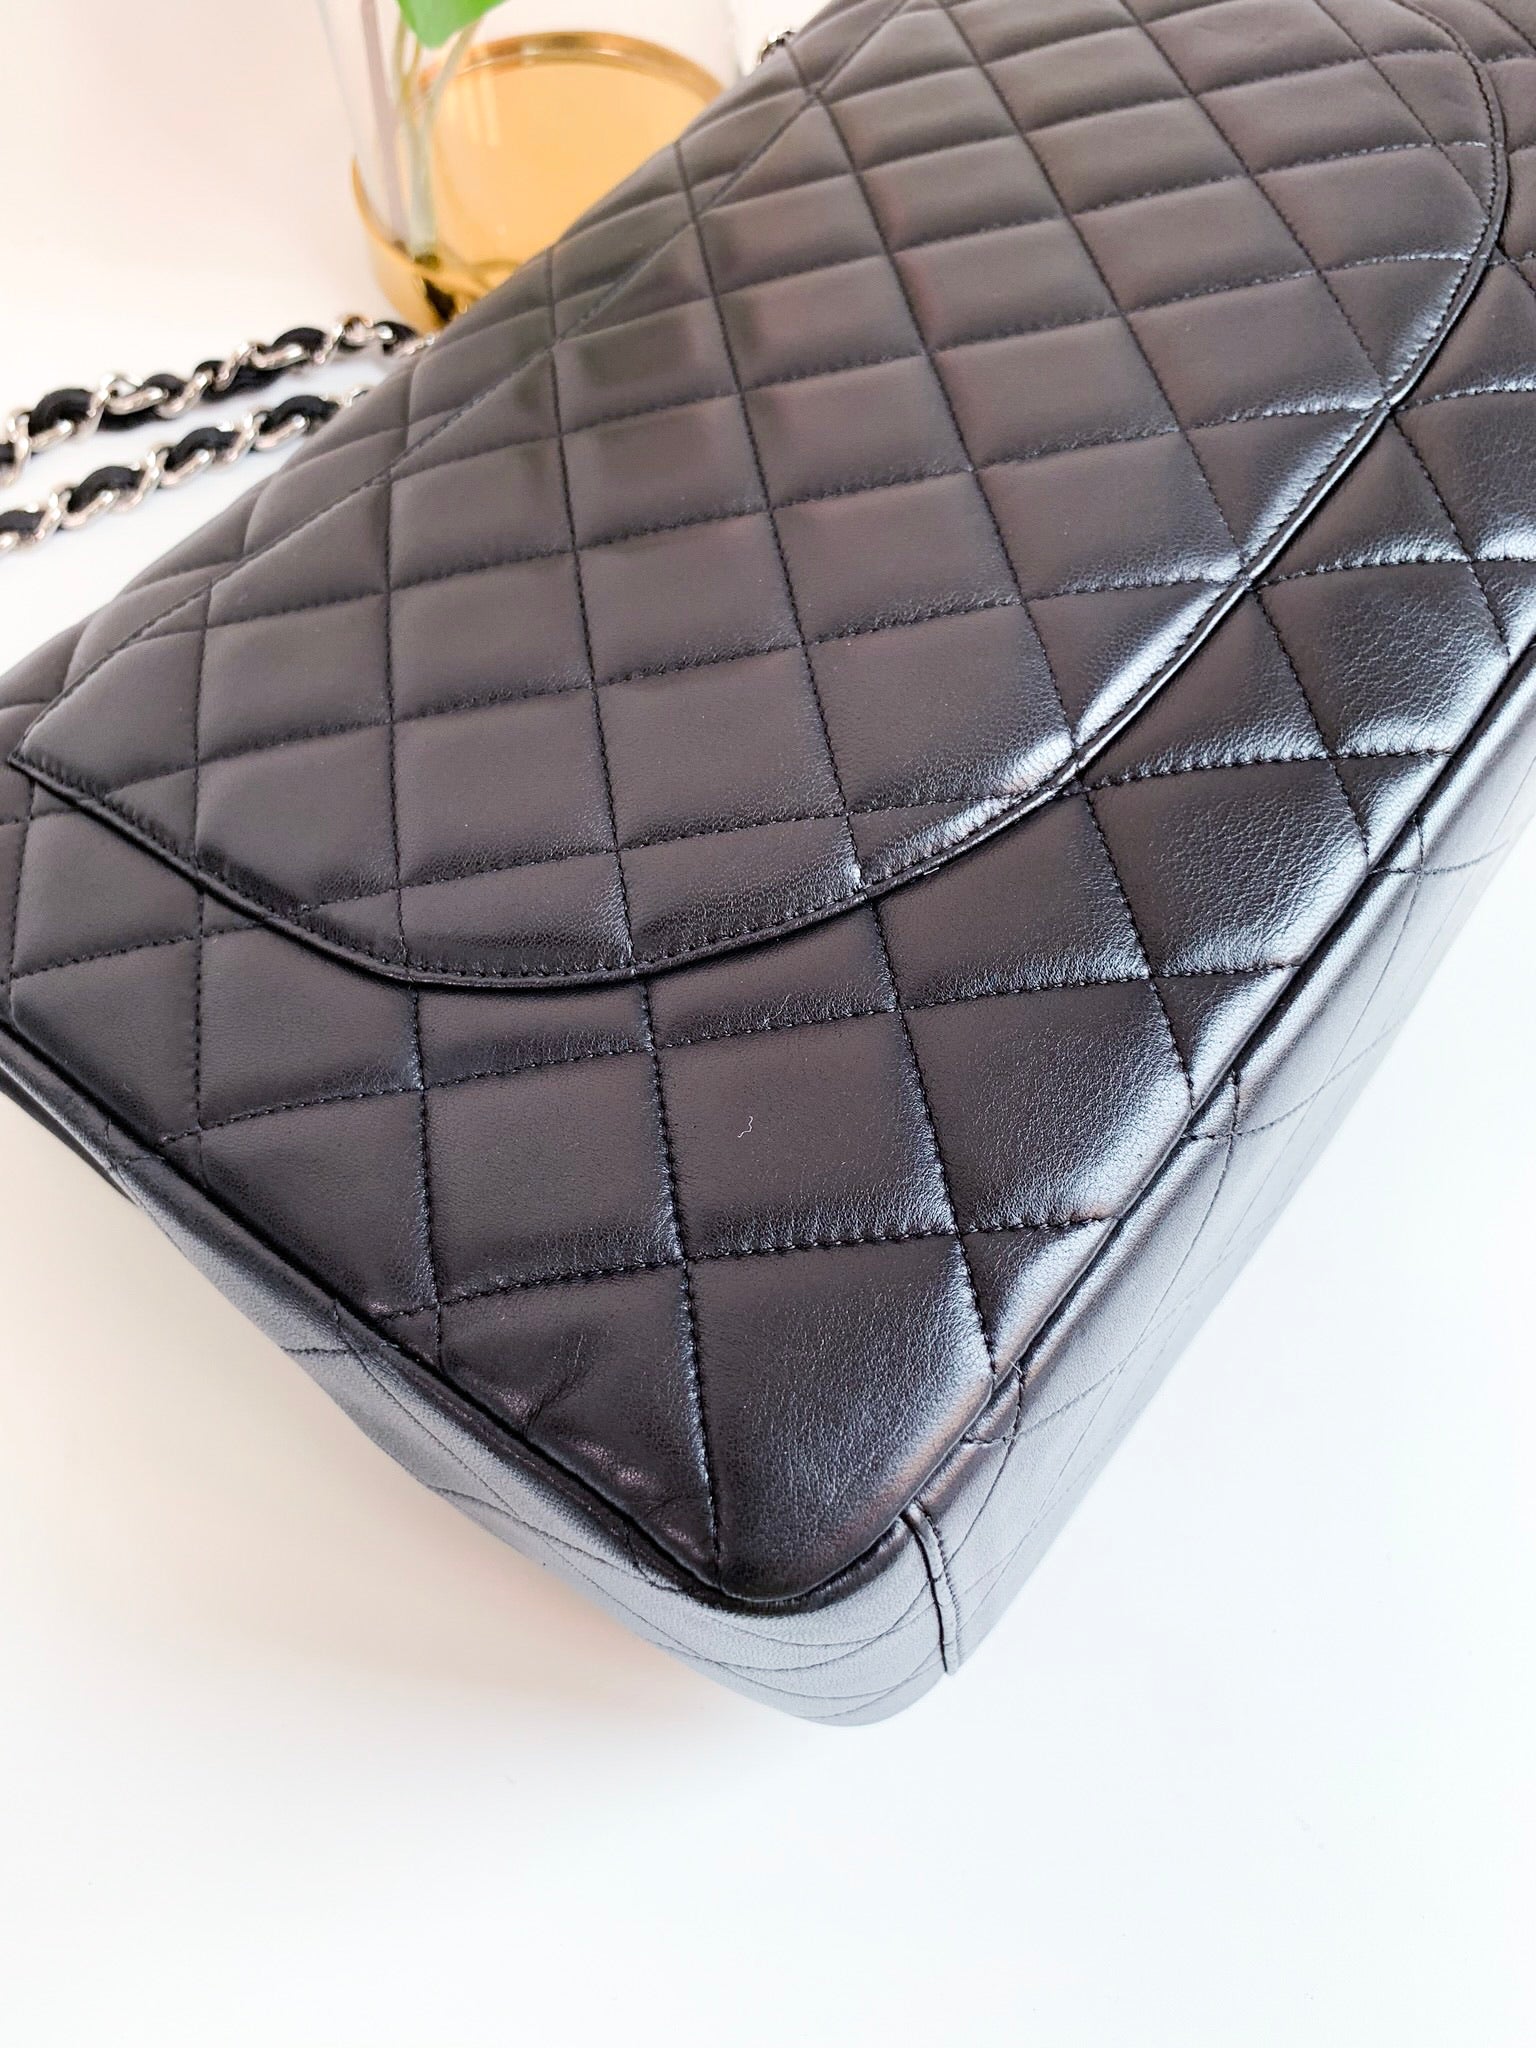 Pre-Loved Chanel Quilted Lambskin Coin Purse – The Sparkling Spur